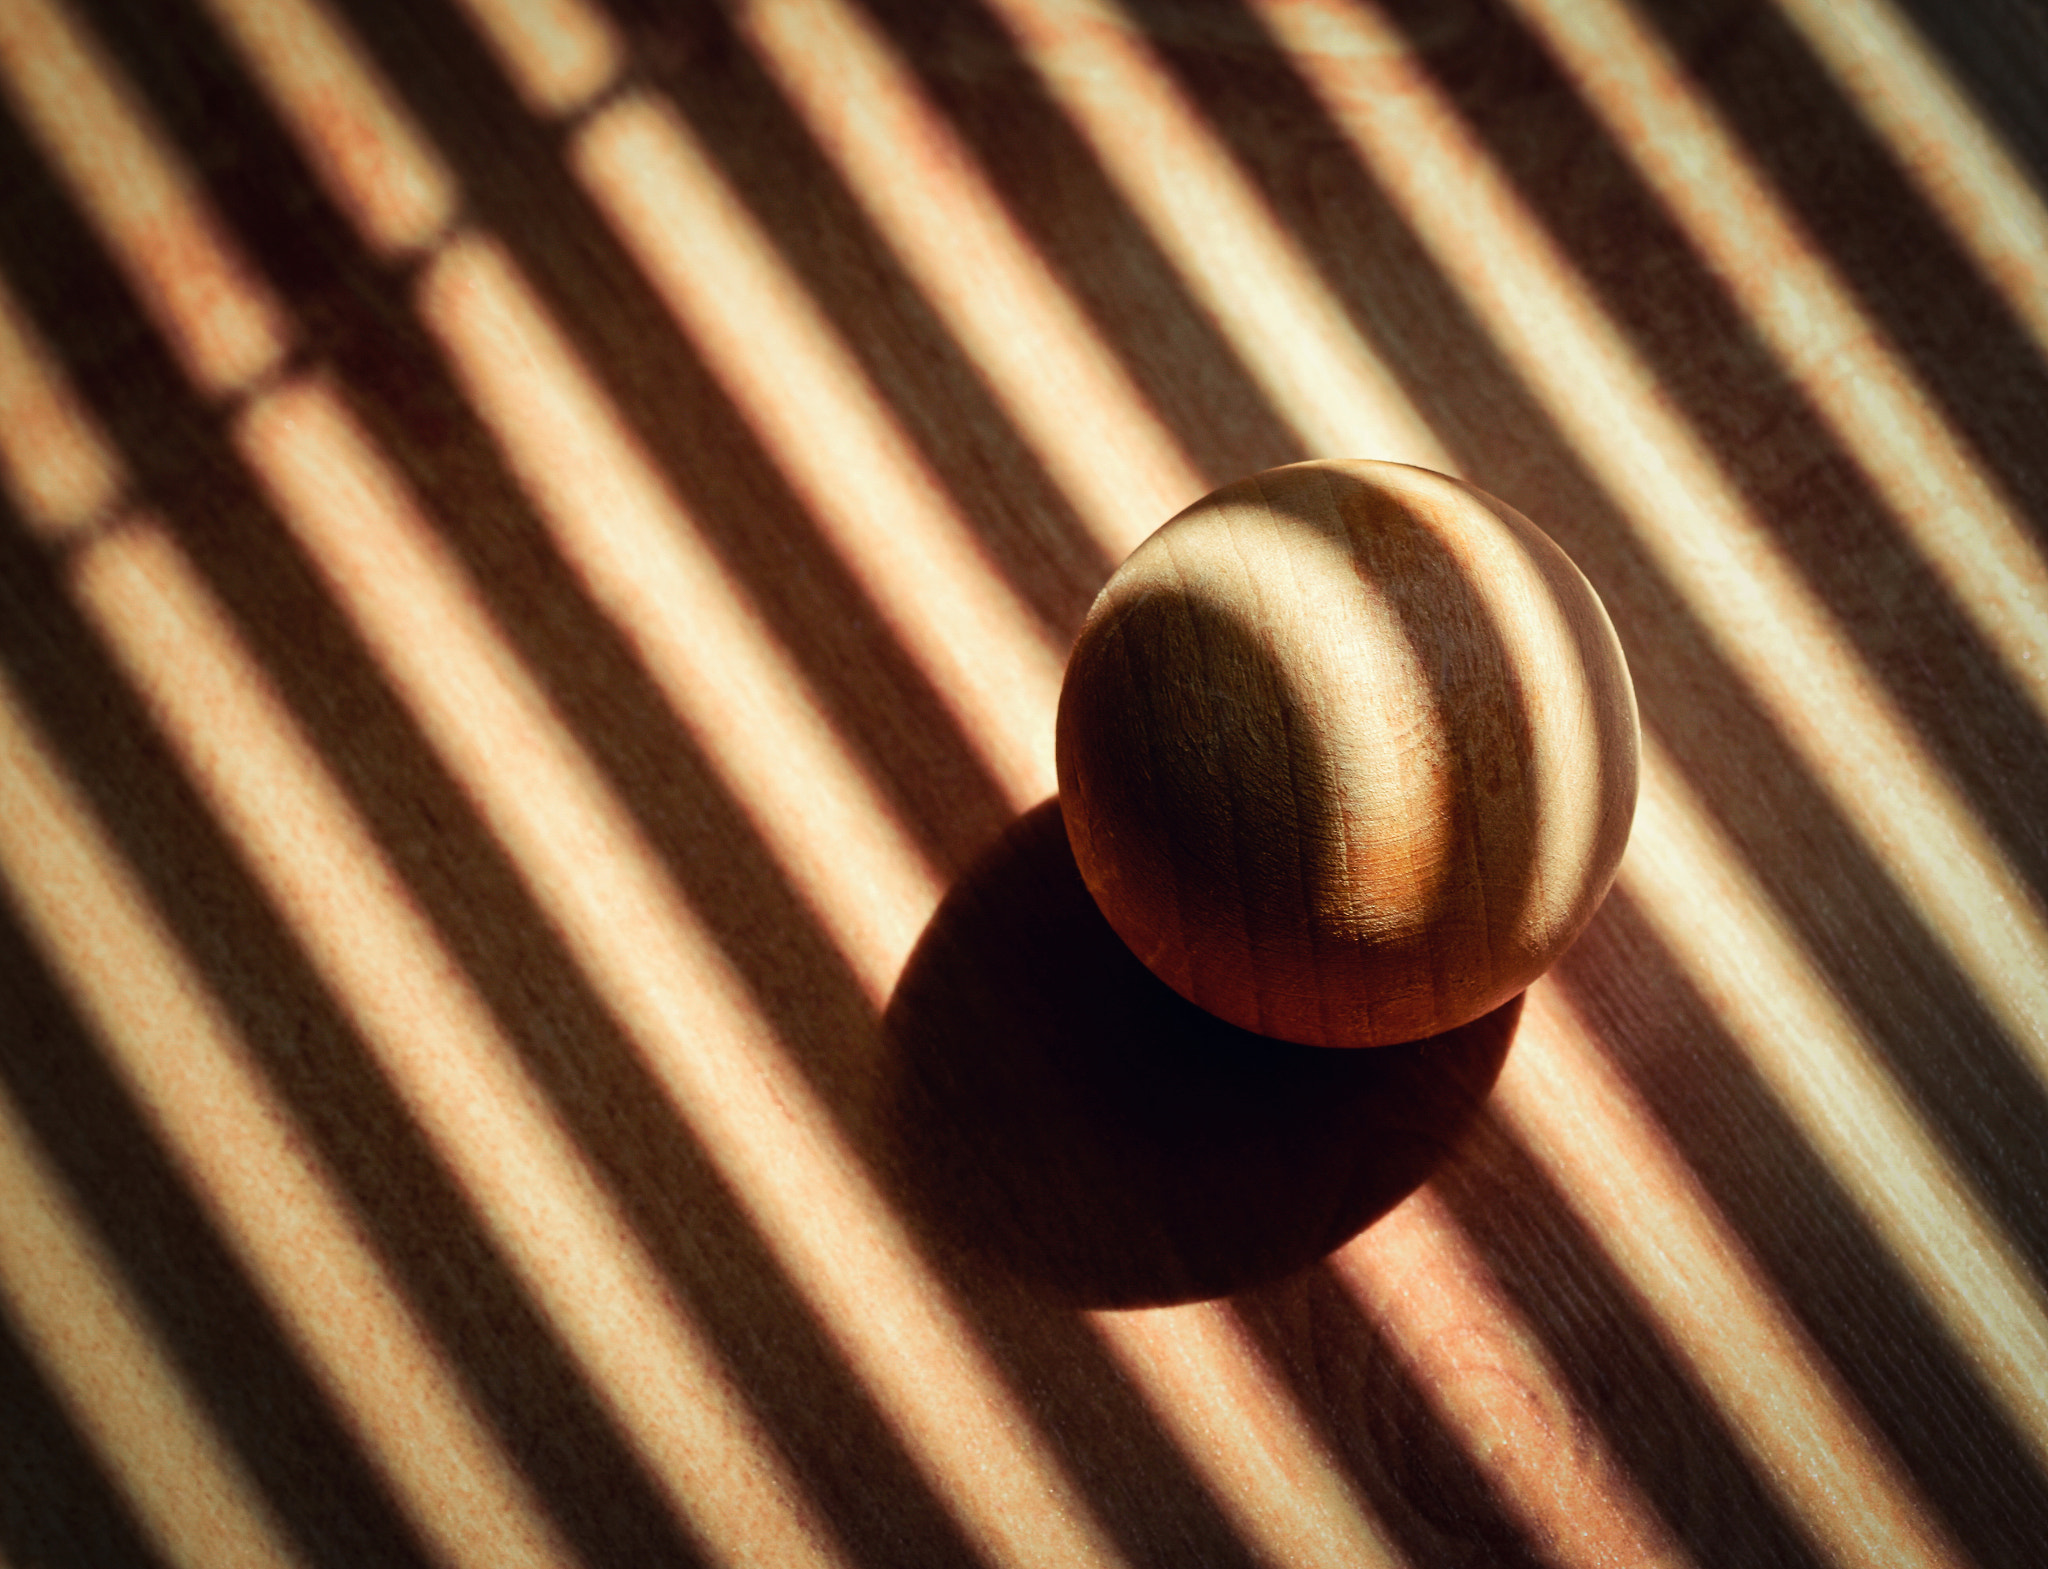 wooden ball covered with the shadow of sunblinds